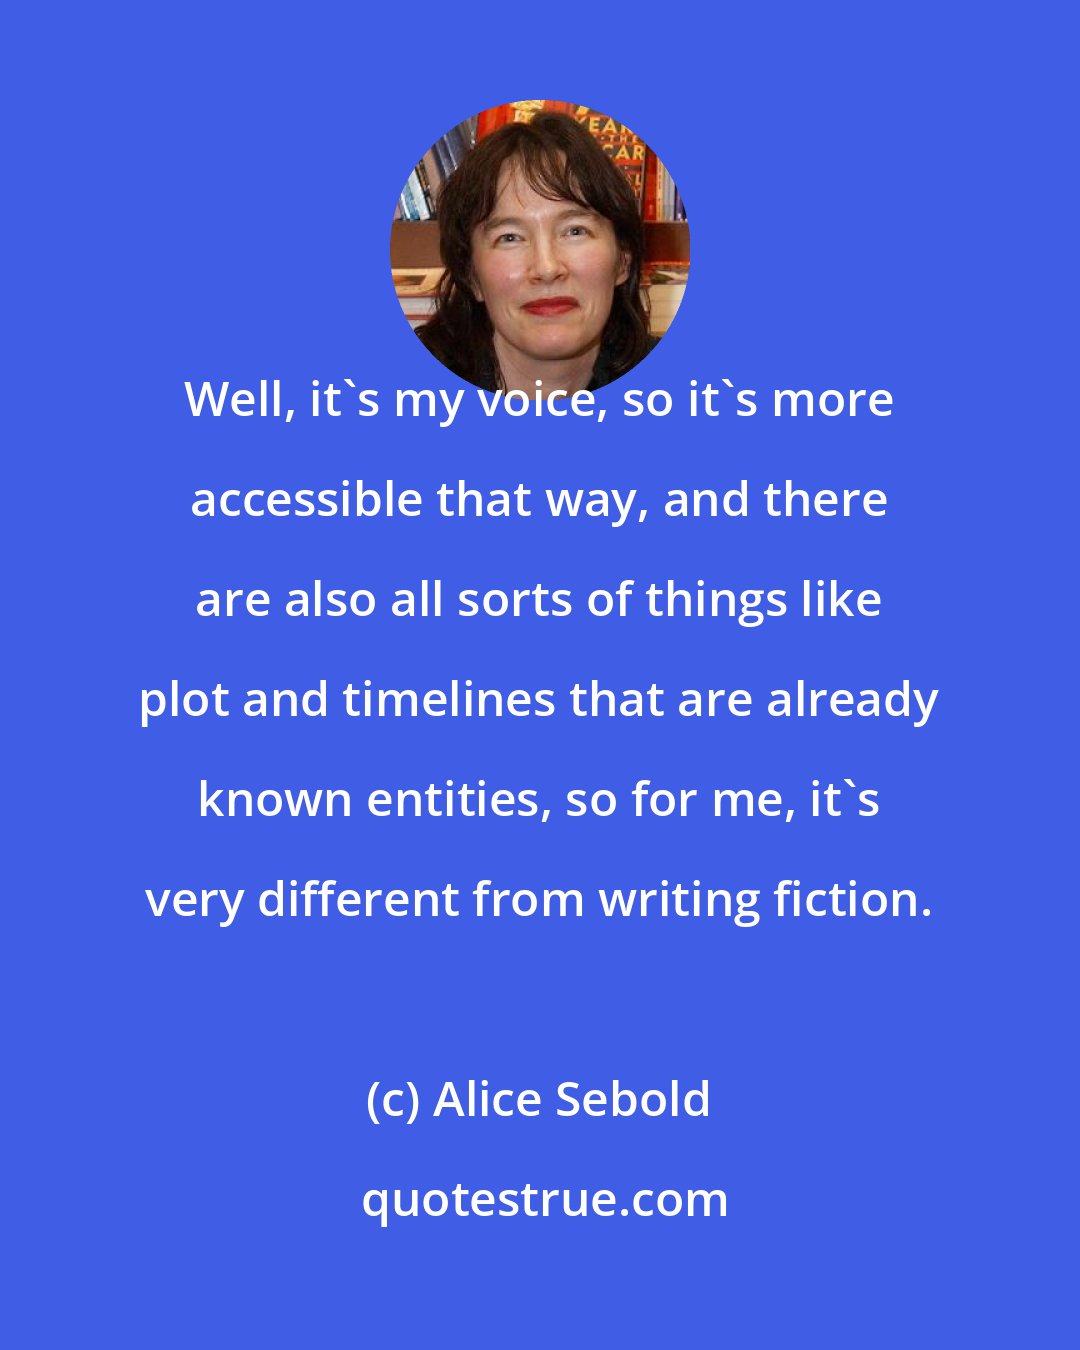 Alice Sebold: Well, it's my voice, so it's more accessible that way, and there are also all sorts of things like plot and timelines that are already known entities, so for me, it's very different from writing fiction.